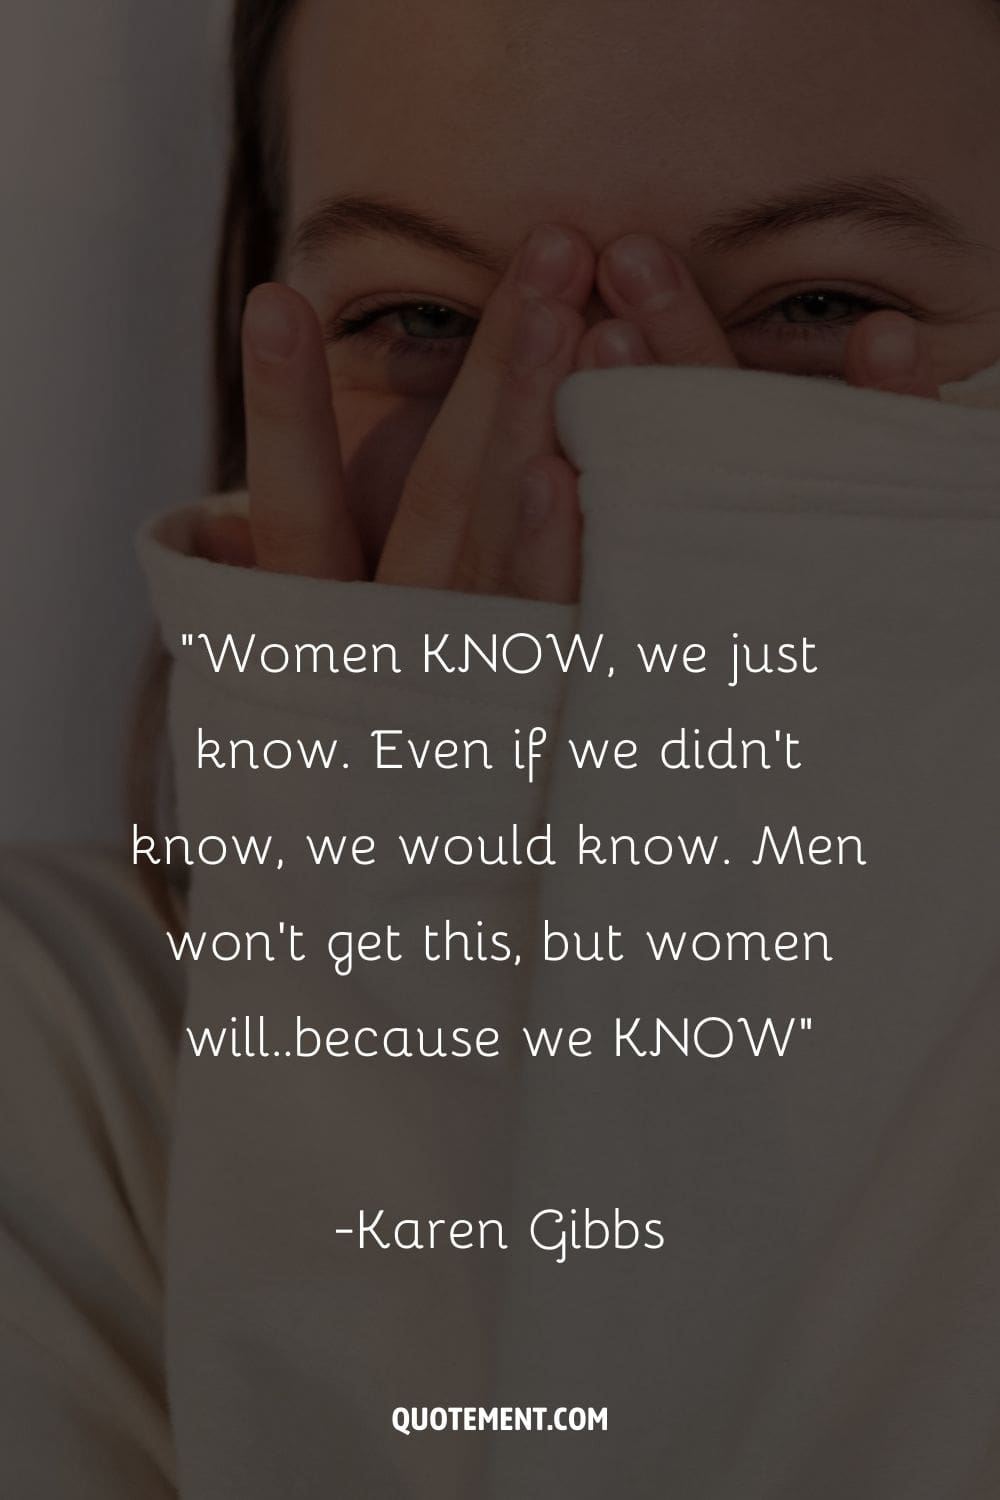 “Women KNOW, we just know. Even if we didn't know, we would know. Men won't get this, but women will..because we KNOW” ― Karen Gibbs, A Gallery of Scrapbook Creations